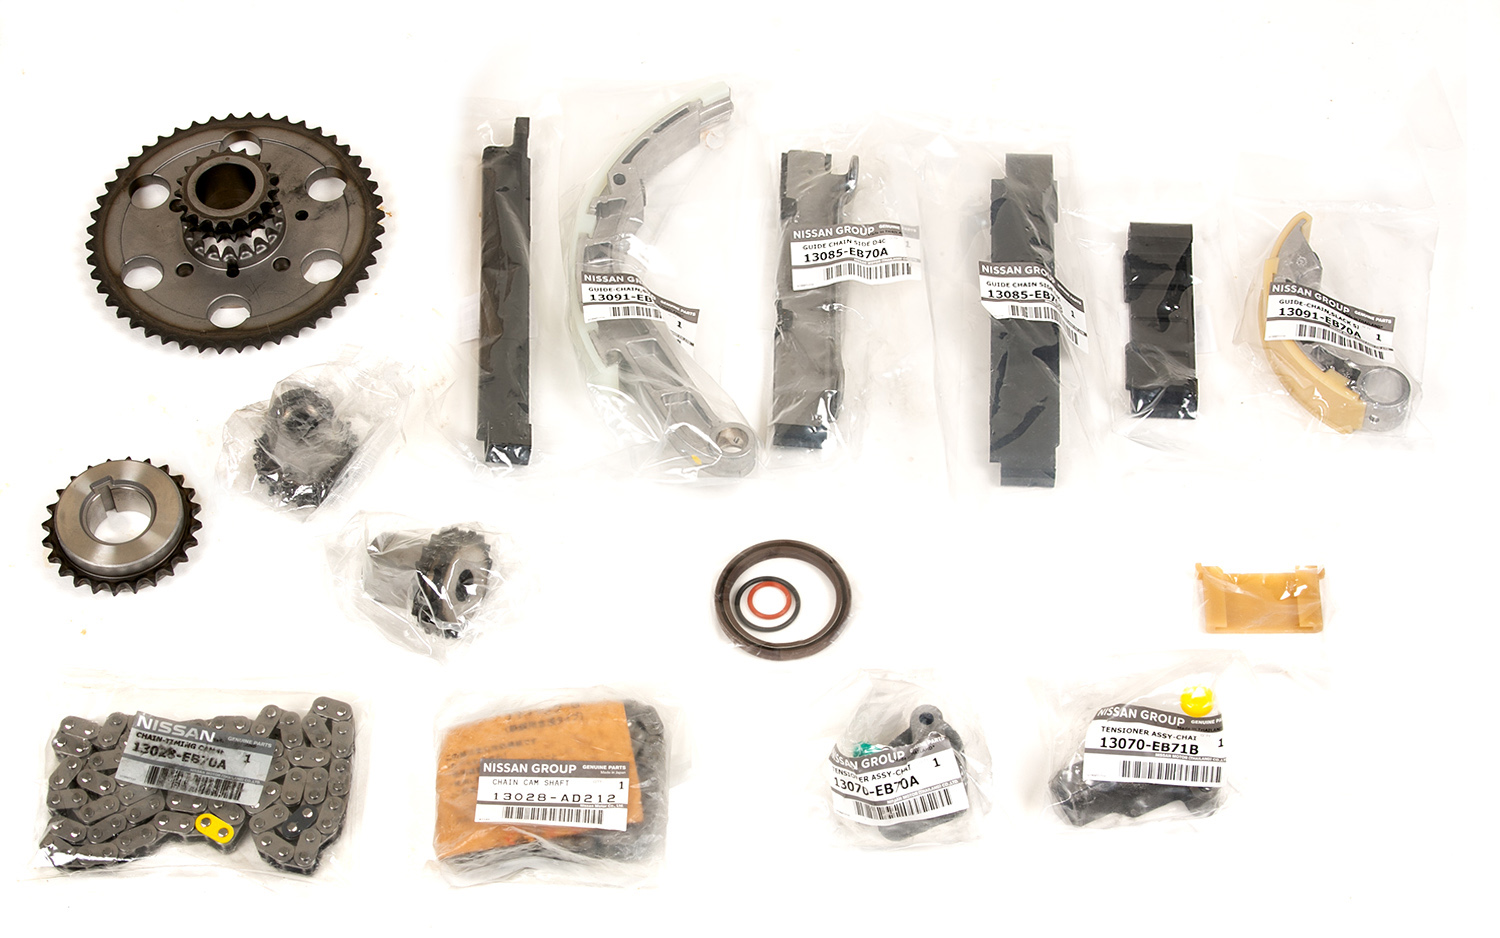 aftermakeSingle Row Chain Kit